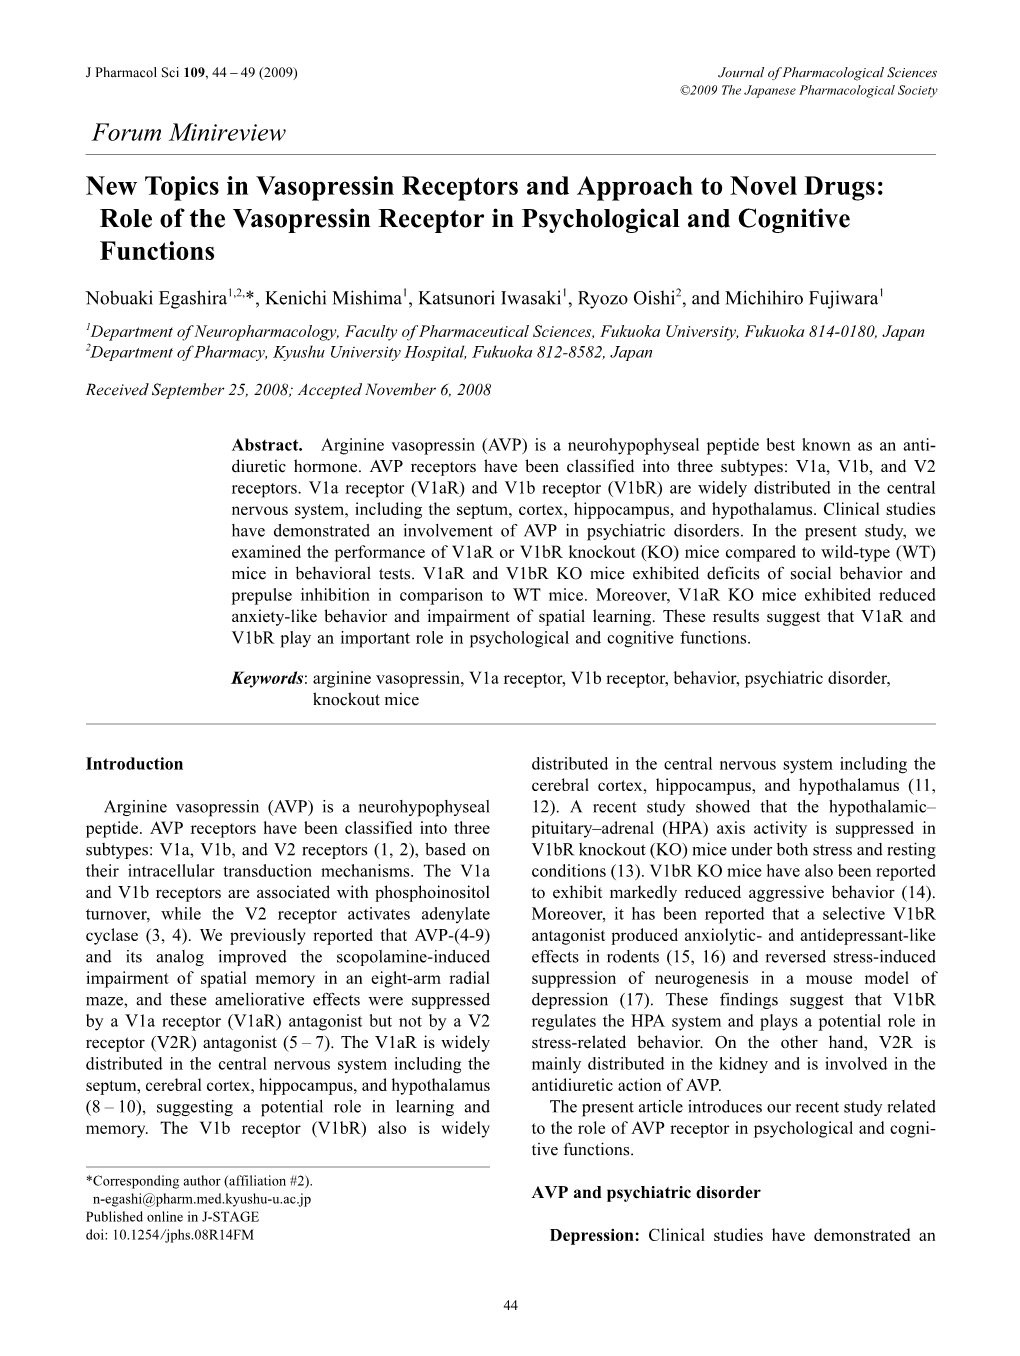 Role of the Vasopressin Receptor in Psychological and Cognitive Functions